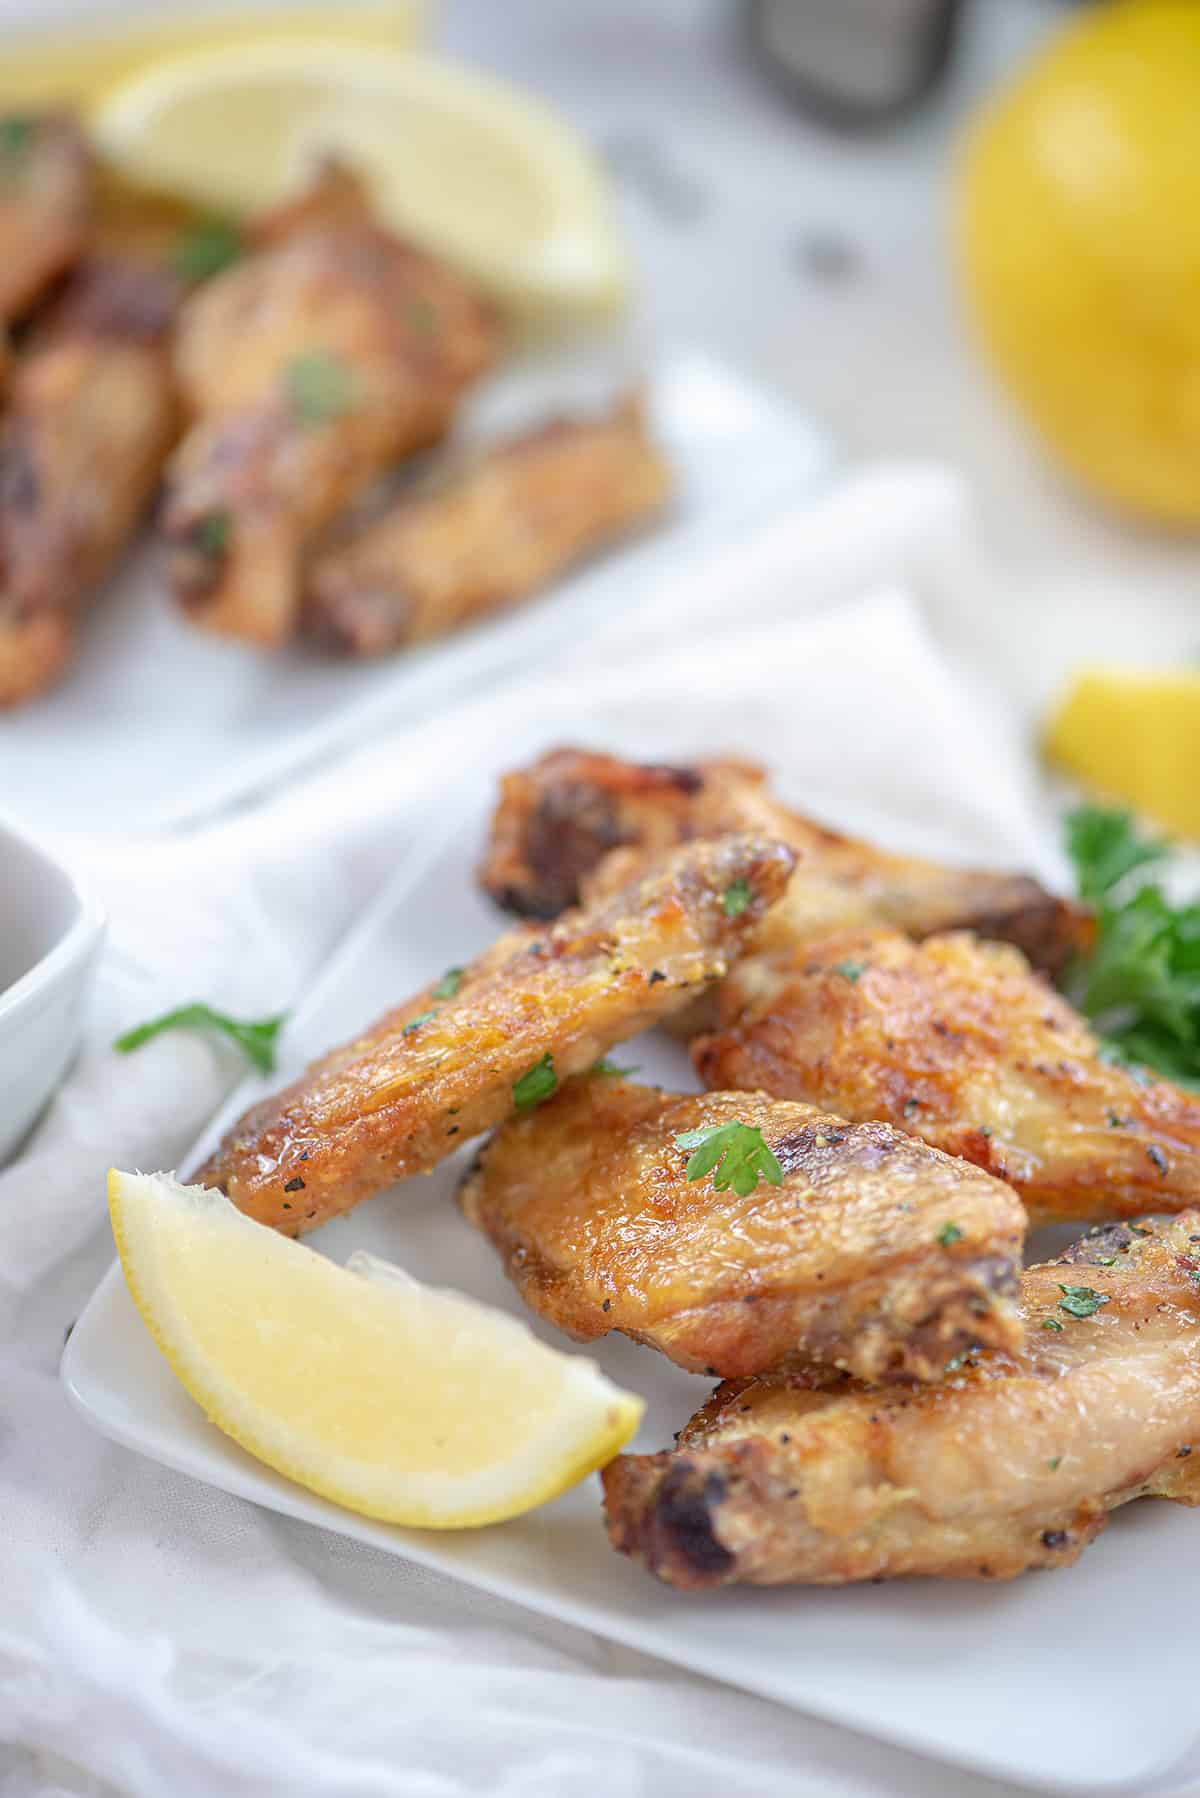 Lemon pepper chicken wings on a white plate next to a wedge of lemon with another plate in the background.